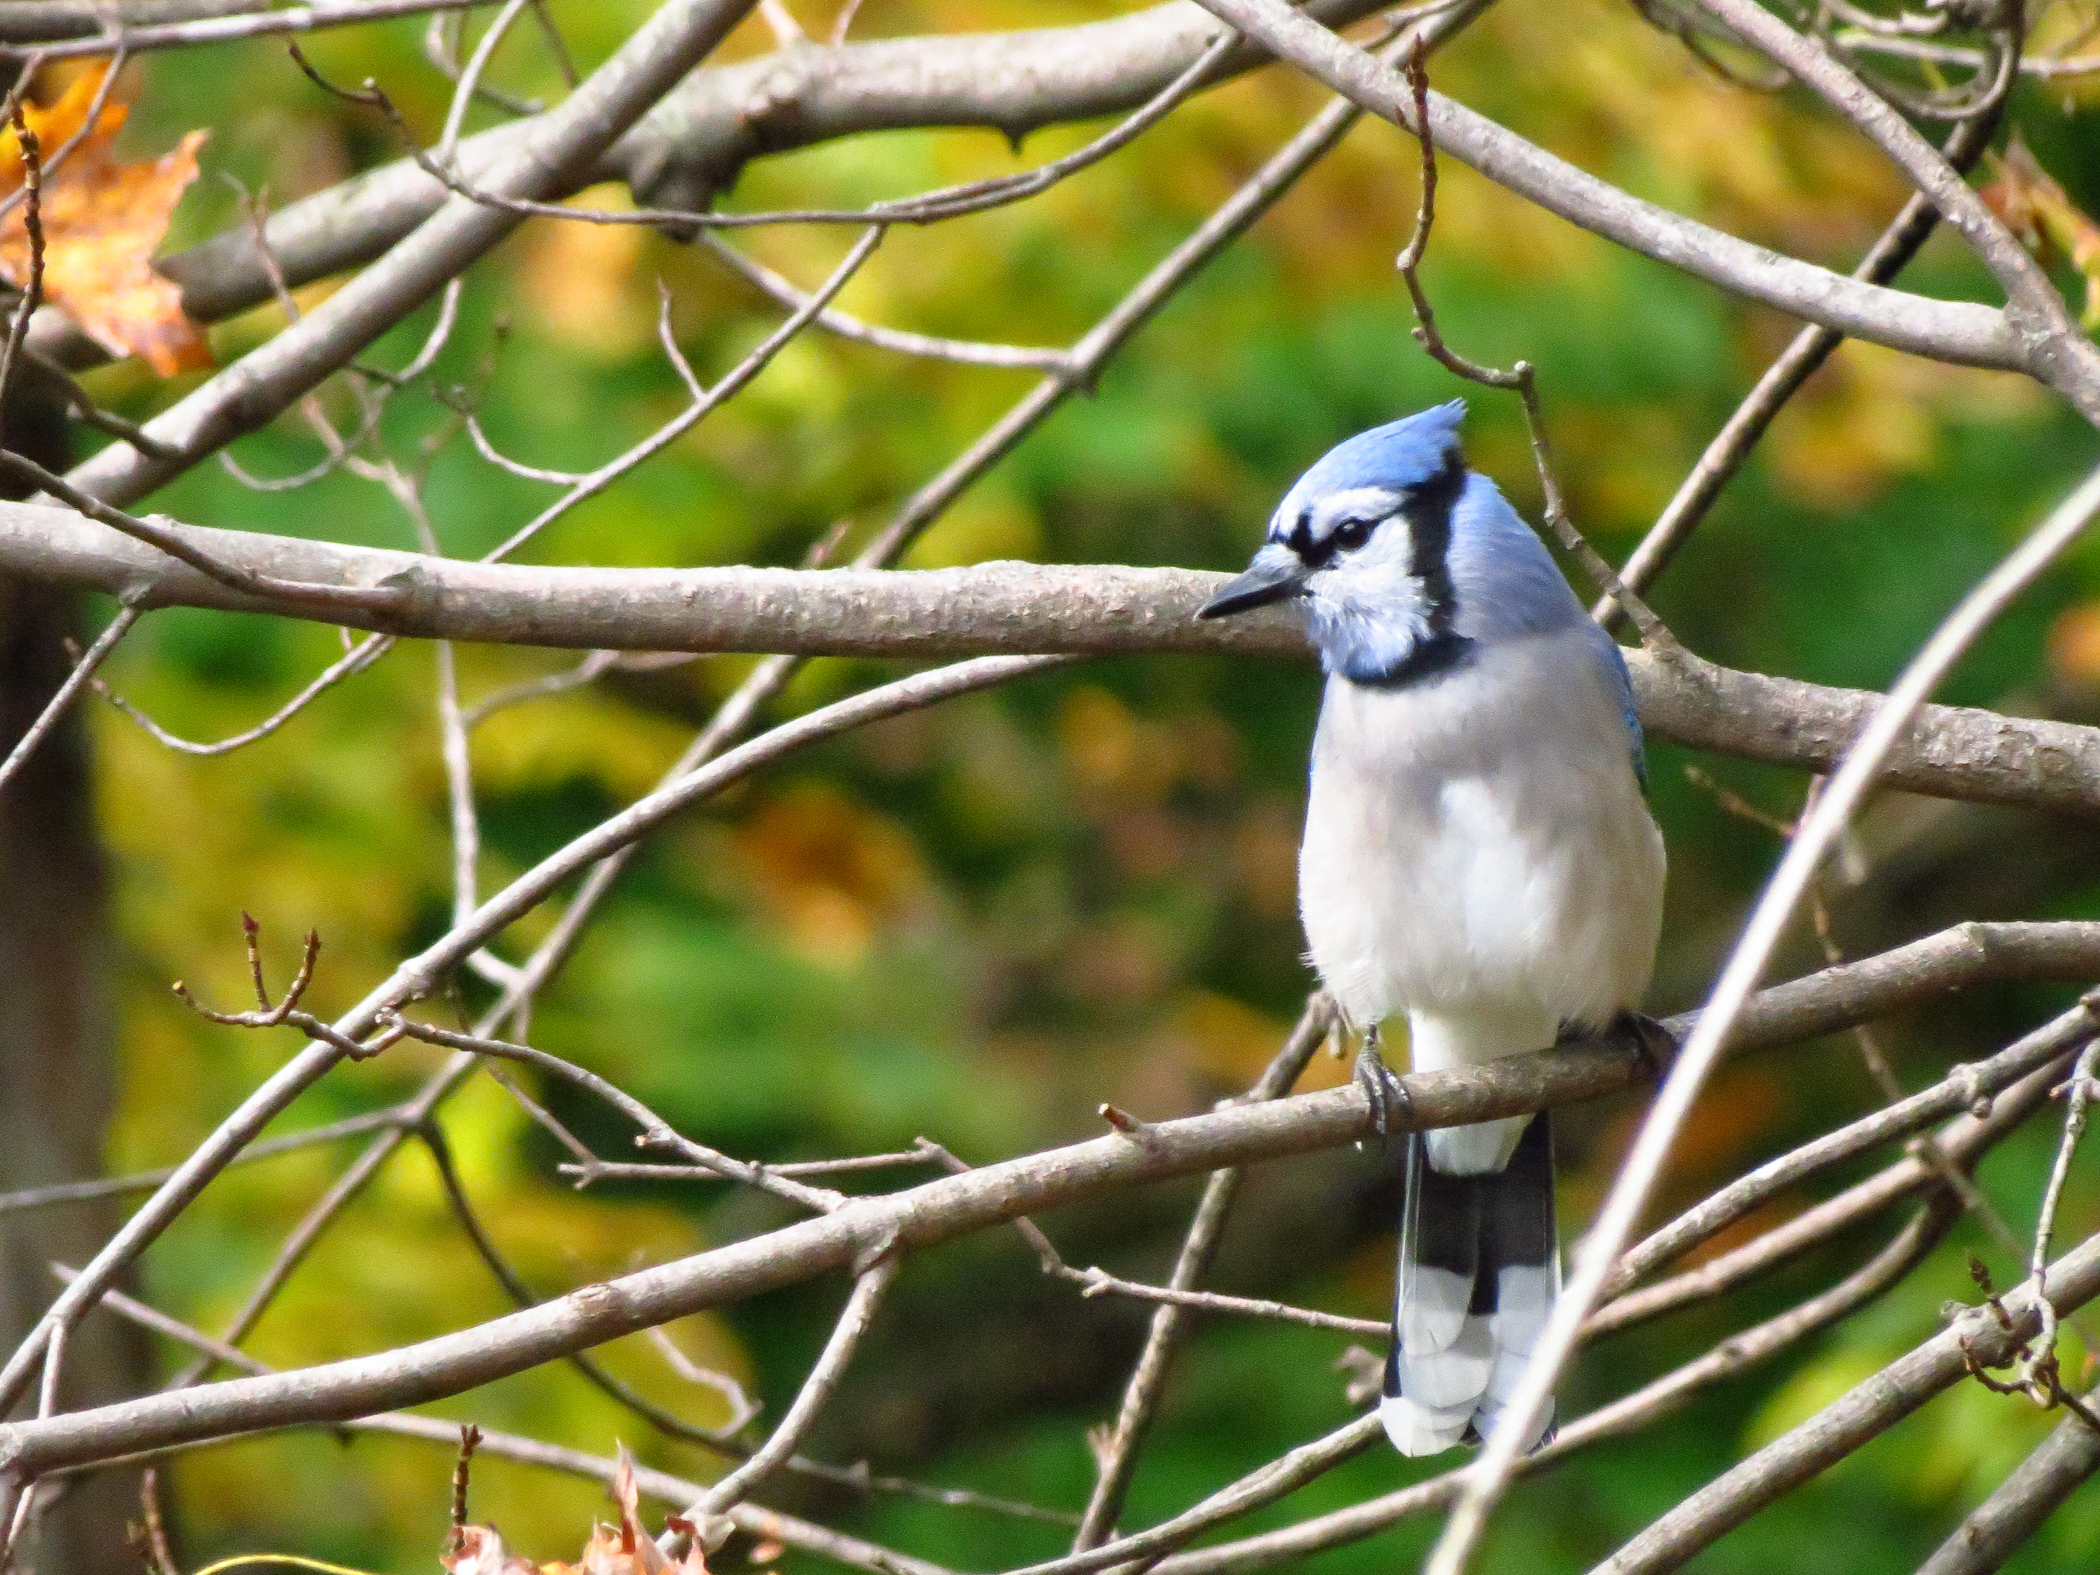 Blue Jay Watching (user submitted)